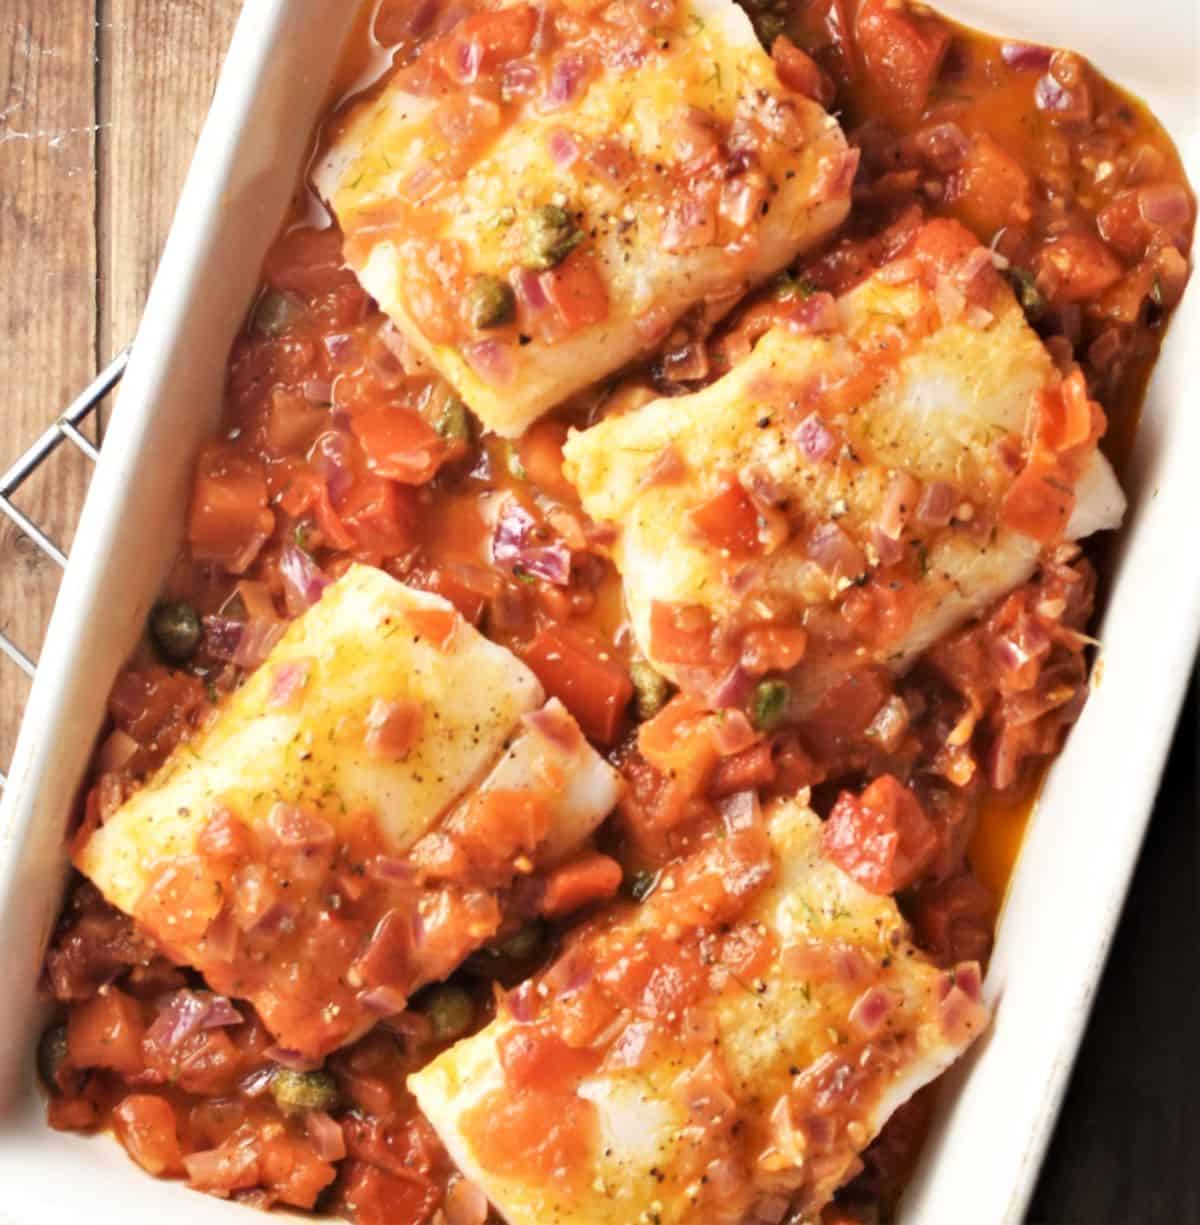 Top down view of 4 cod pieces in chunky tomato sauce in rectangular dish.